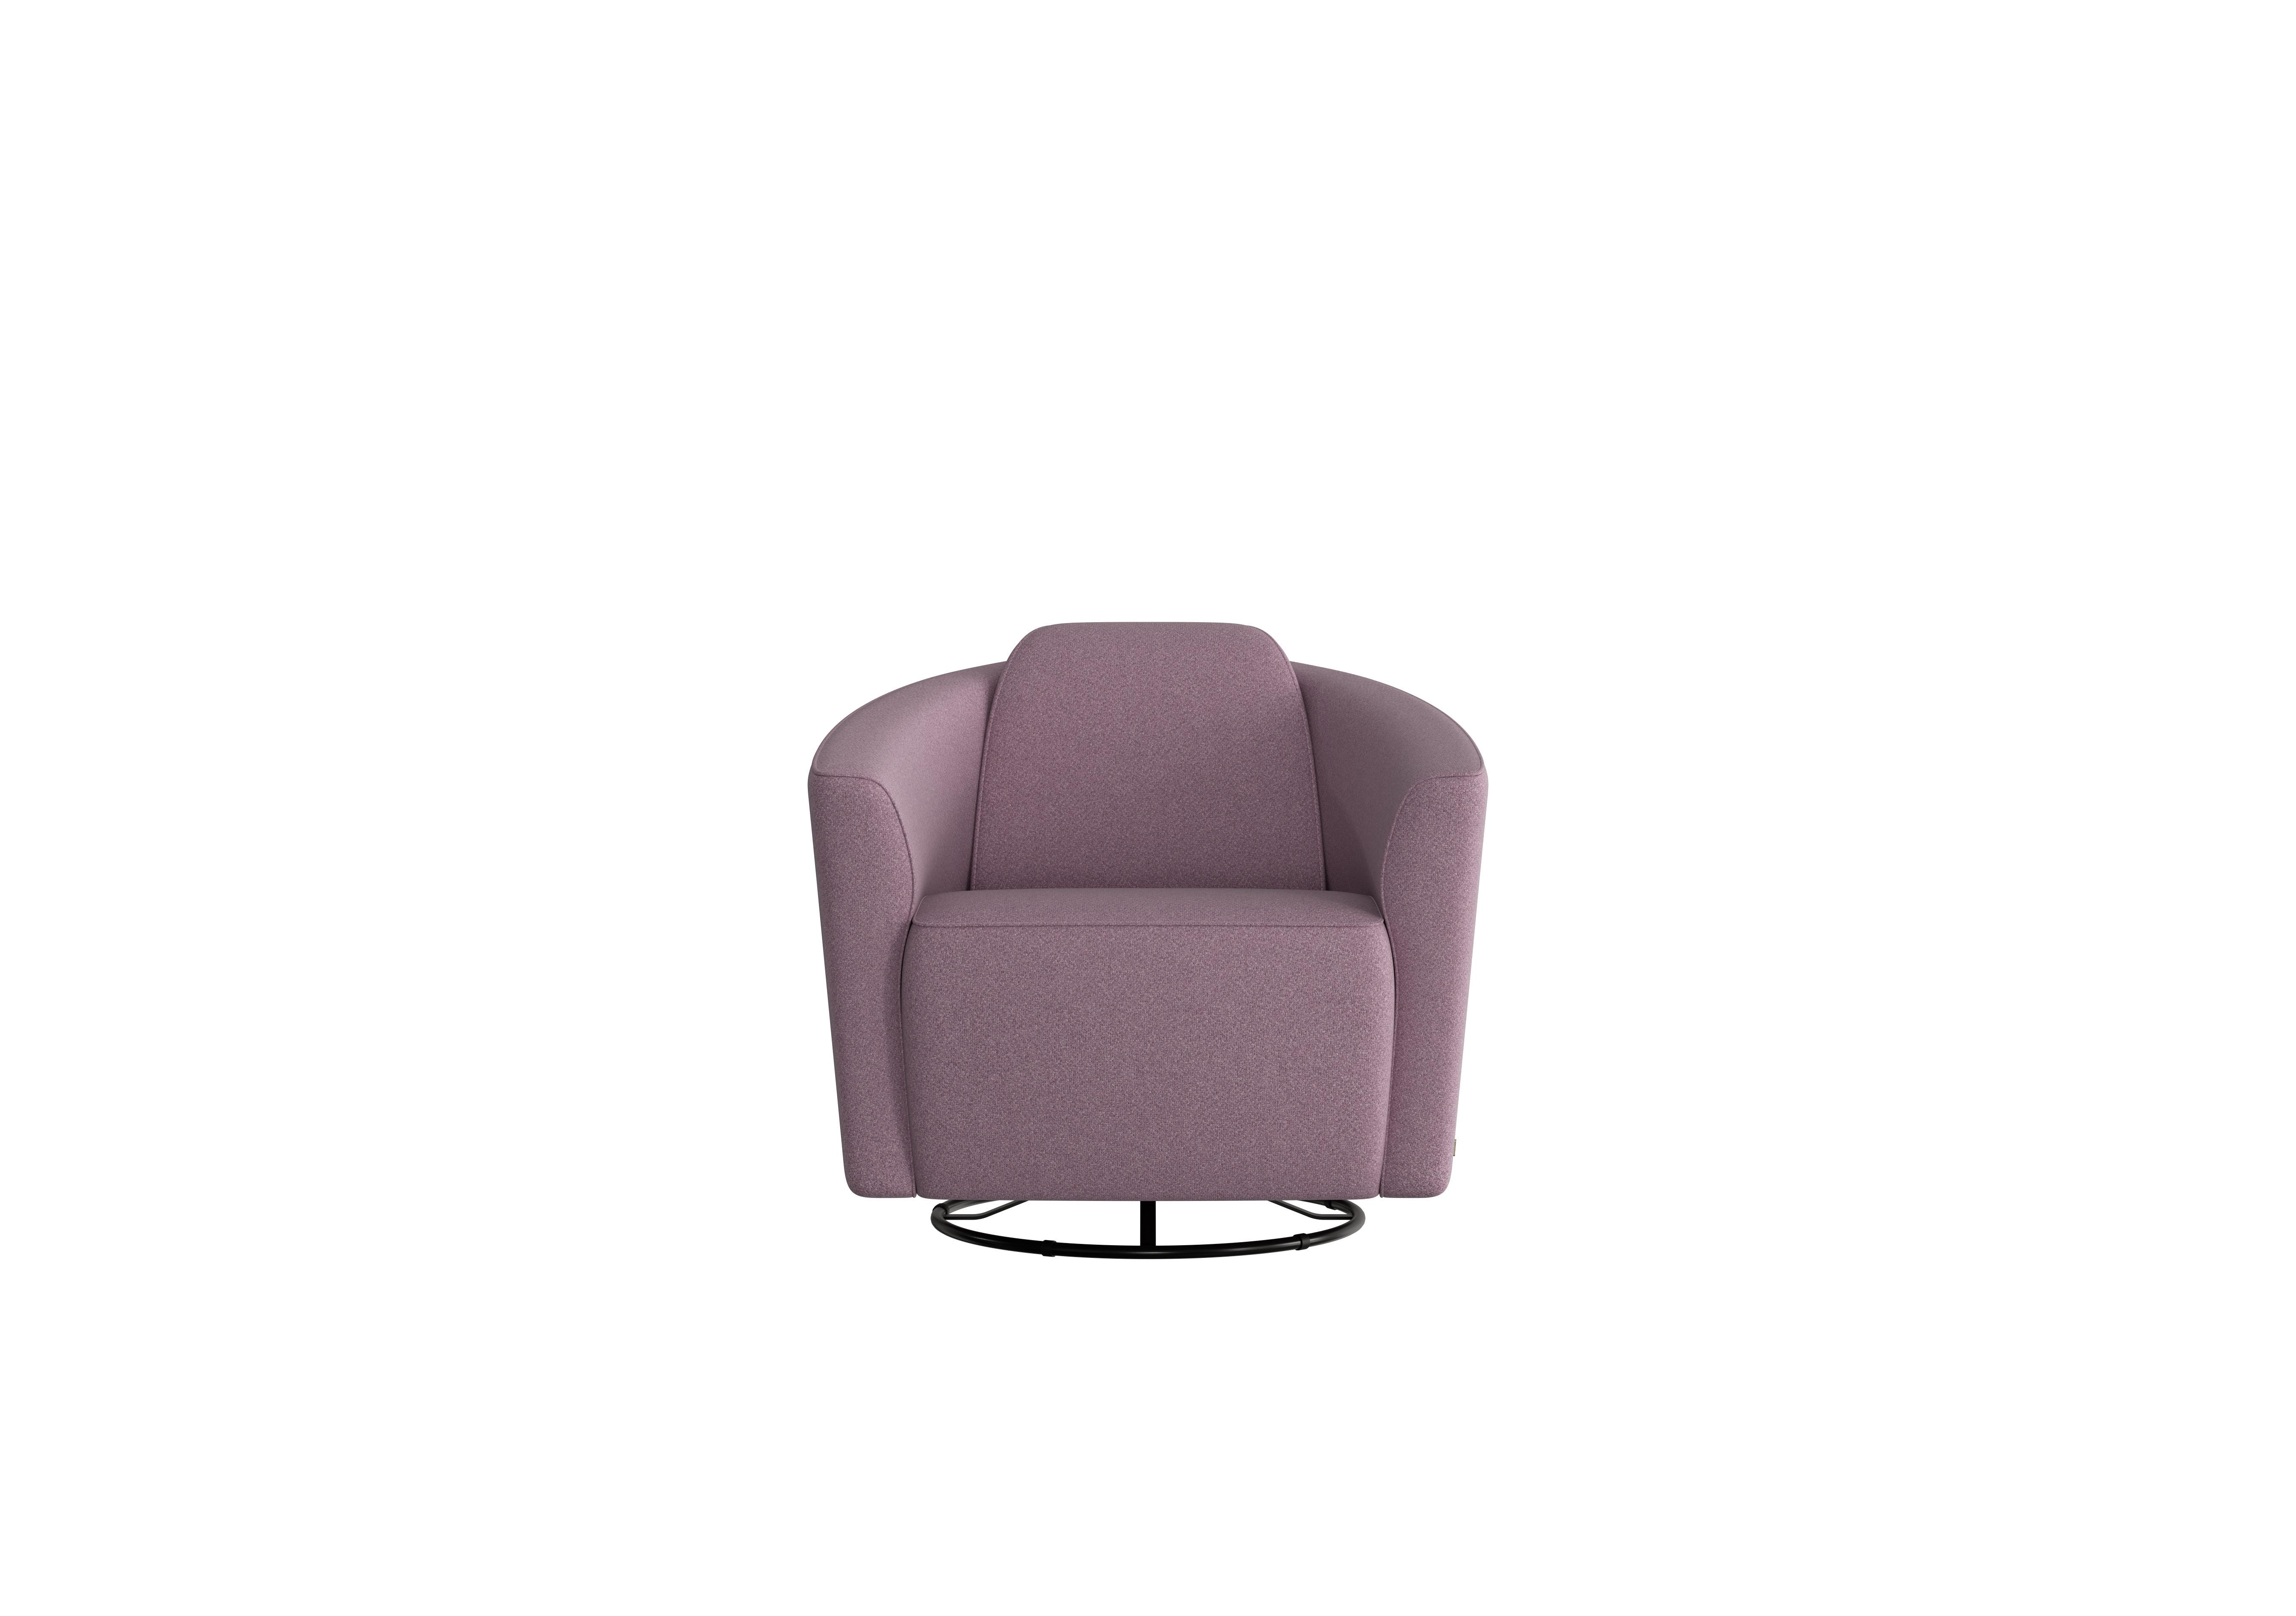 Ketty Fabric Swivel Chair in Coupe Glicine 003 on Furniture Village